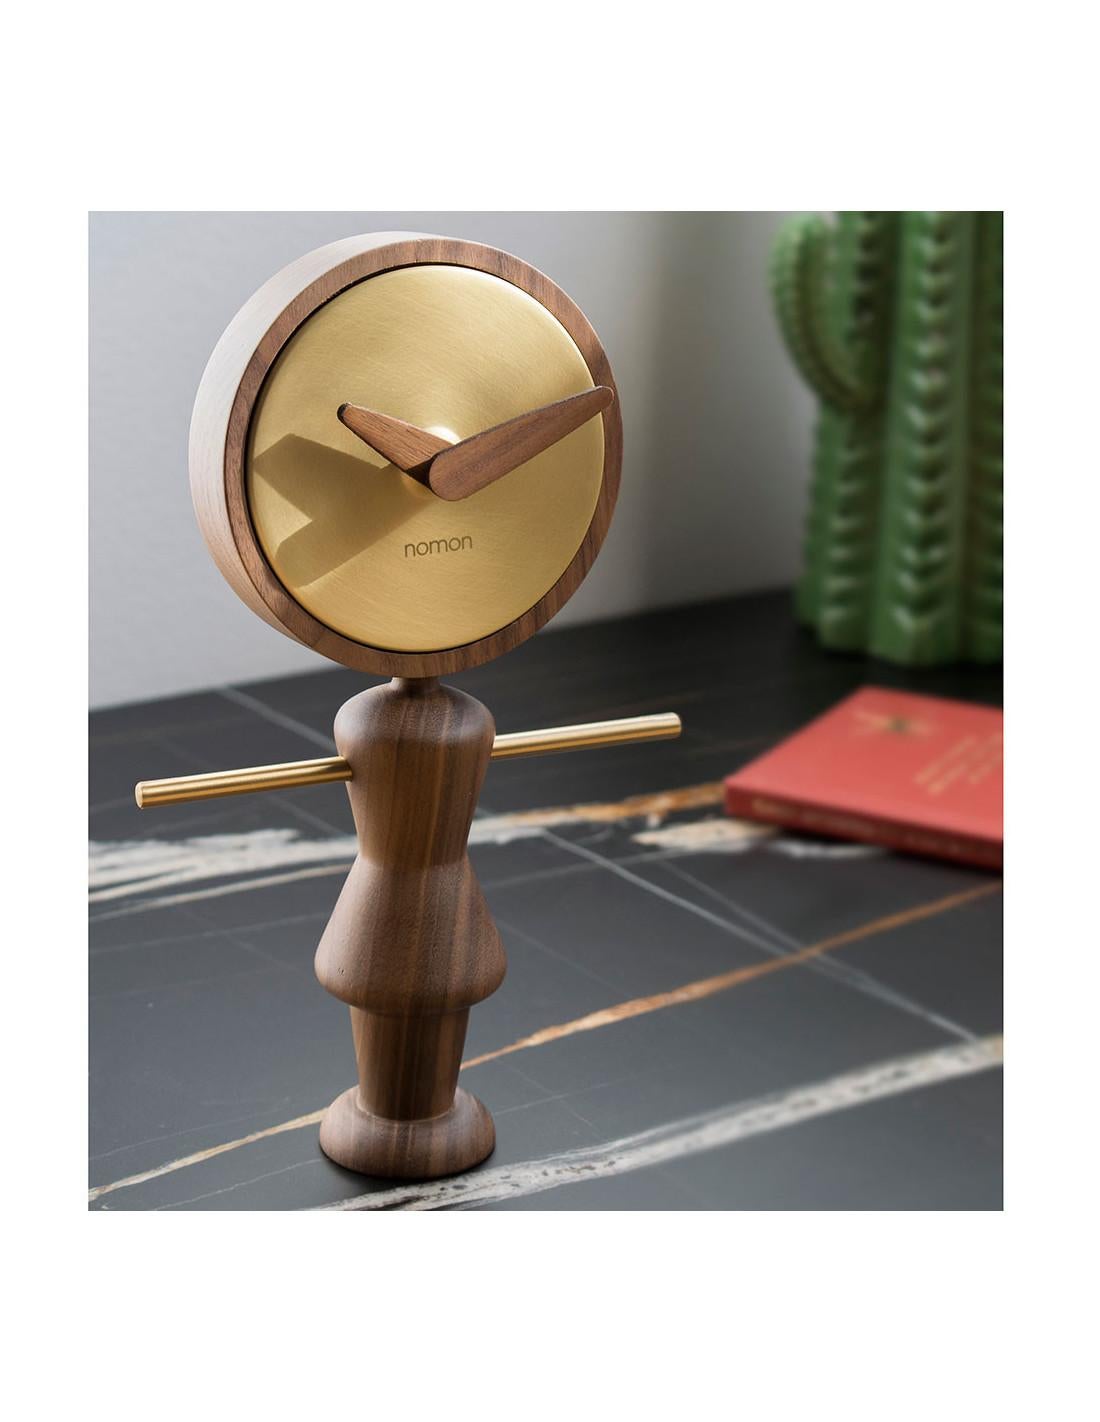  Friendly and fun clocks ideal as a gift to decorate the living room, kitchen or a modern office. Nene G table clock with body and hands in oak or walnut wood and polished brass.
Nene G table clock : Box in polished brass, hands and body in walnut